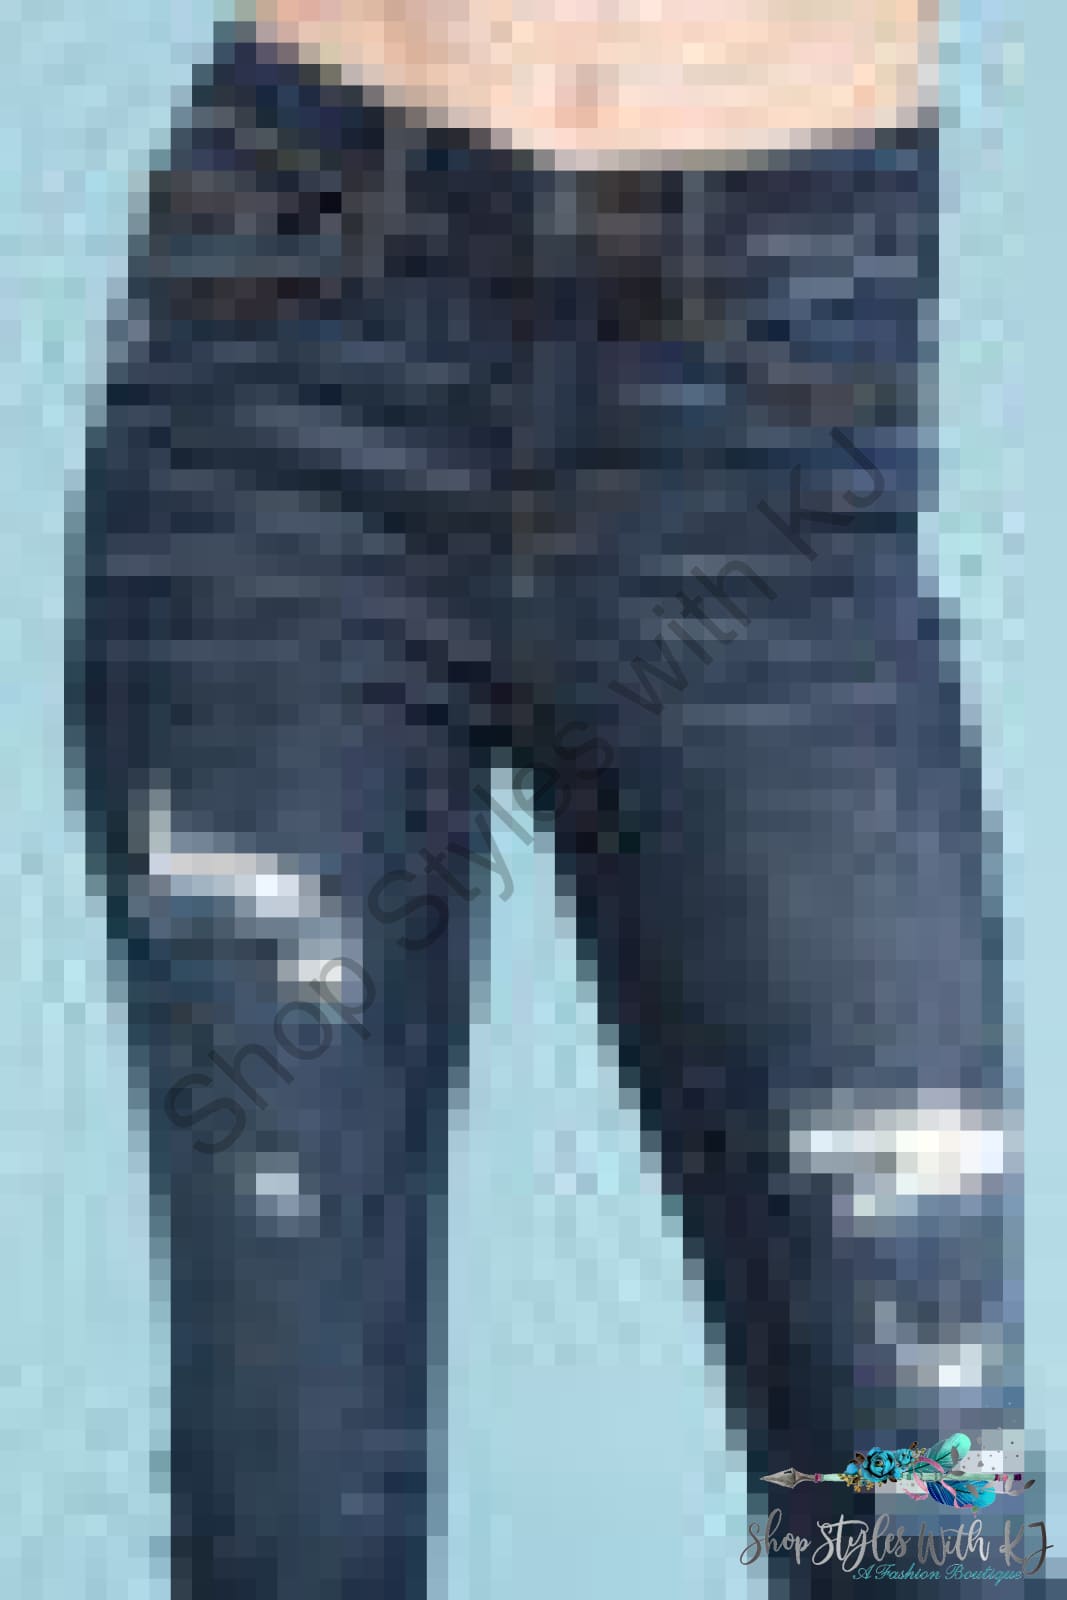 Fuse Patch Destroyed Judy Blue Skinnies Pants